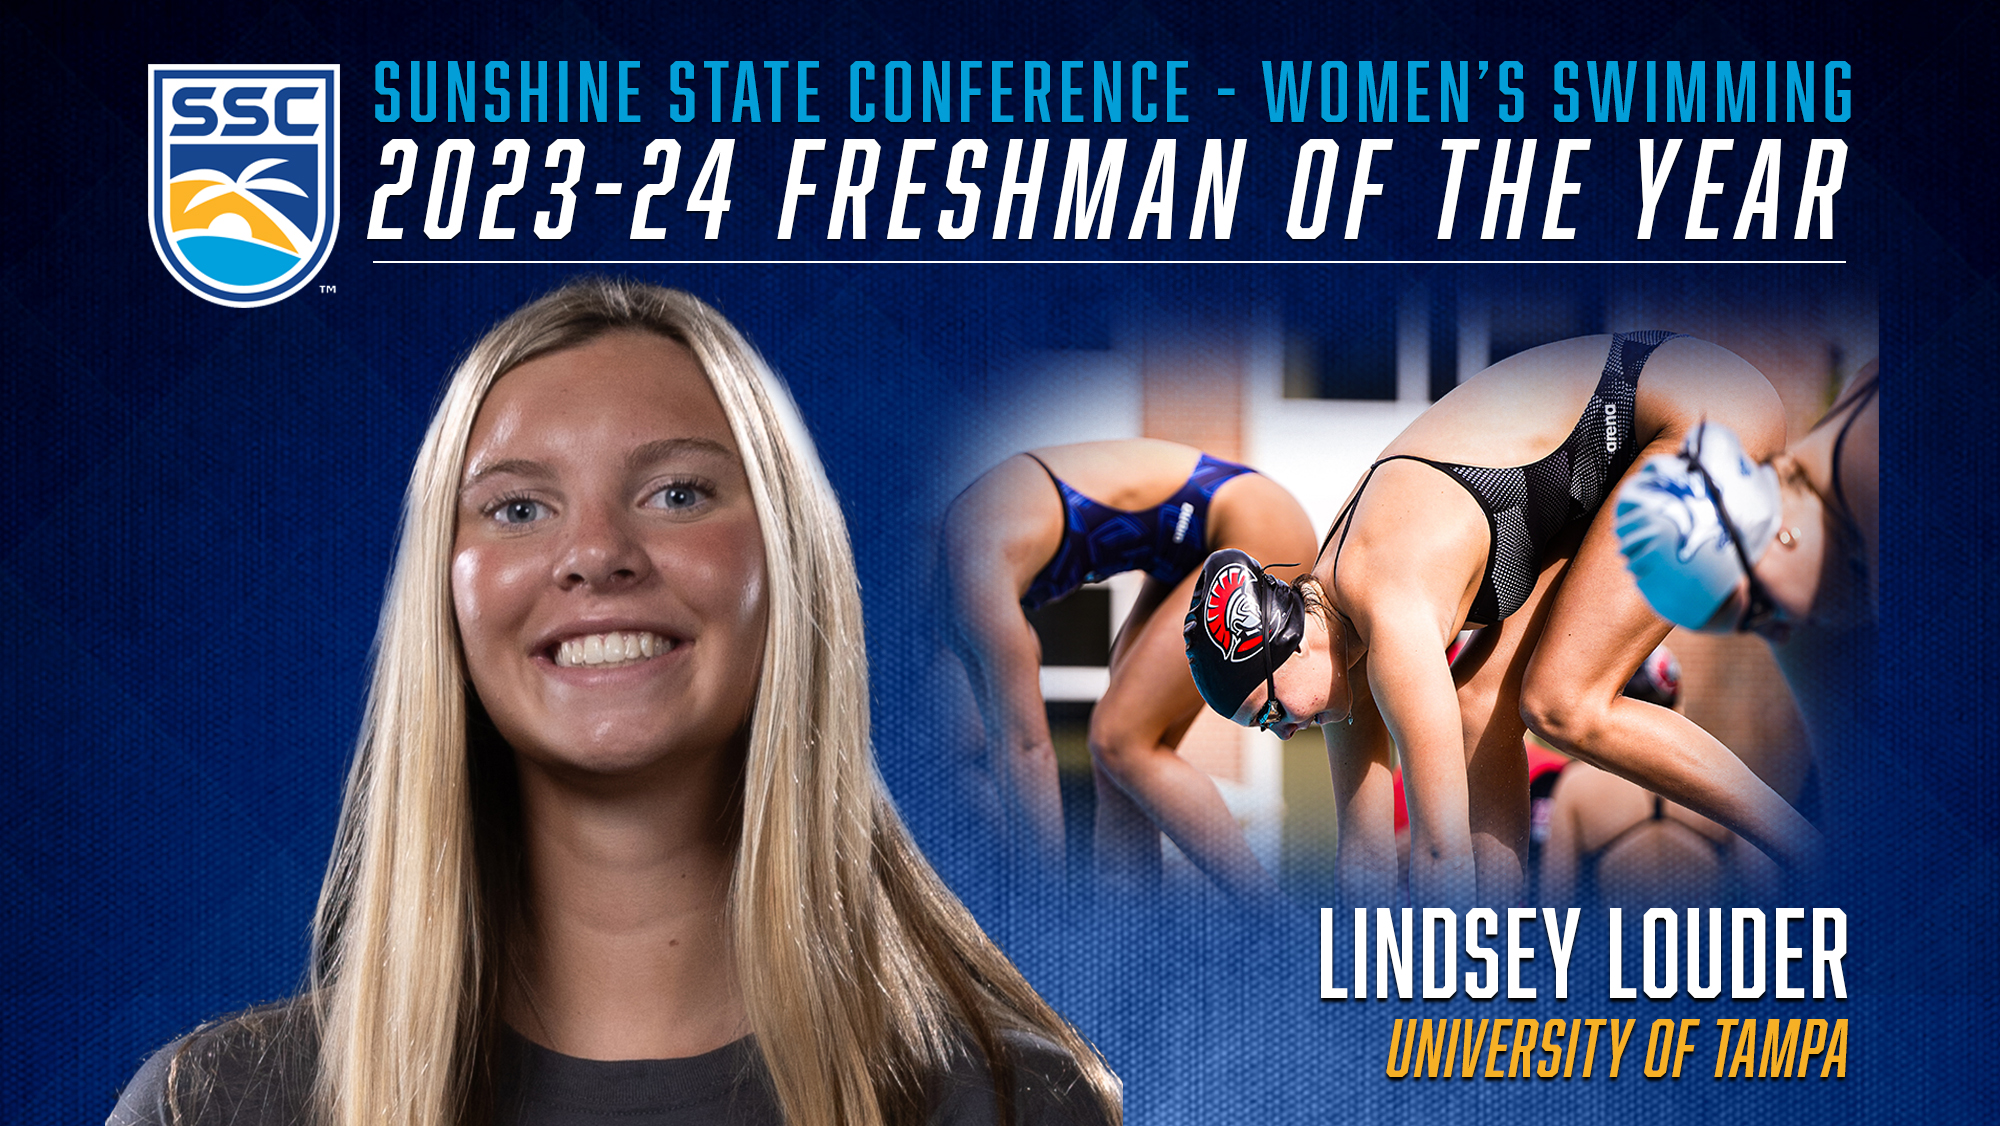 SSC Freshman of the Year Lindsey Louder